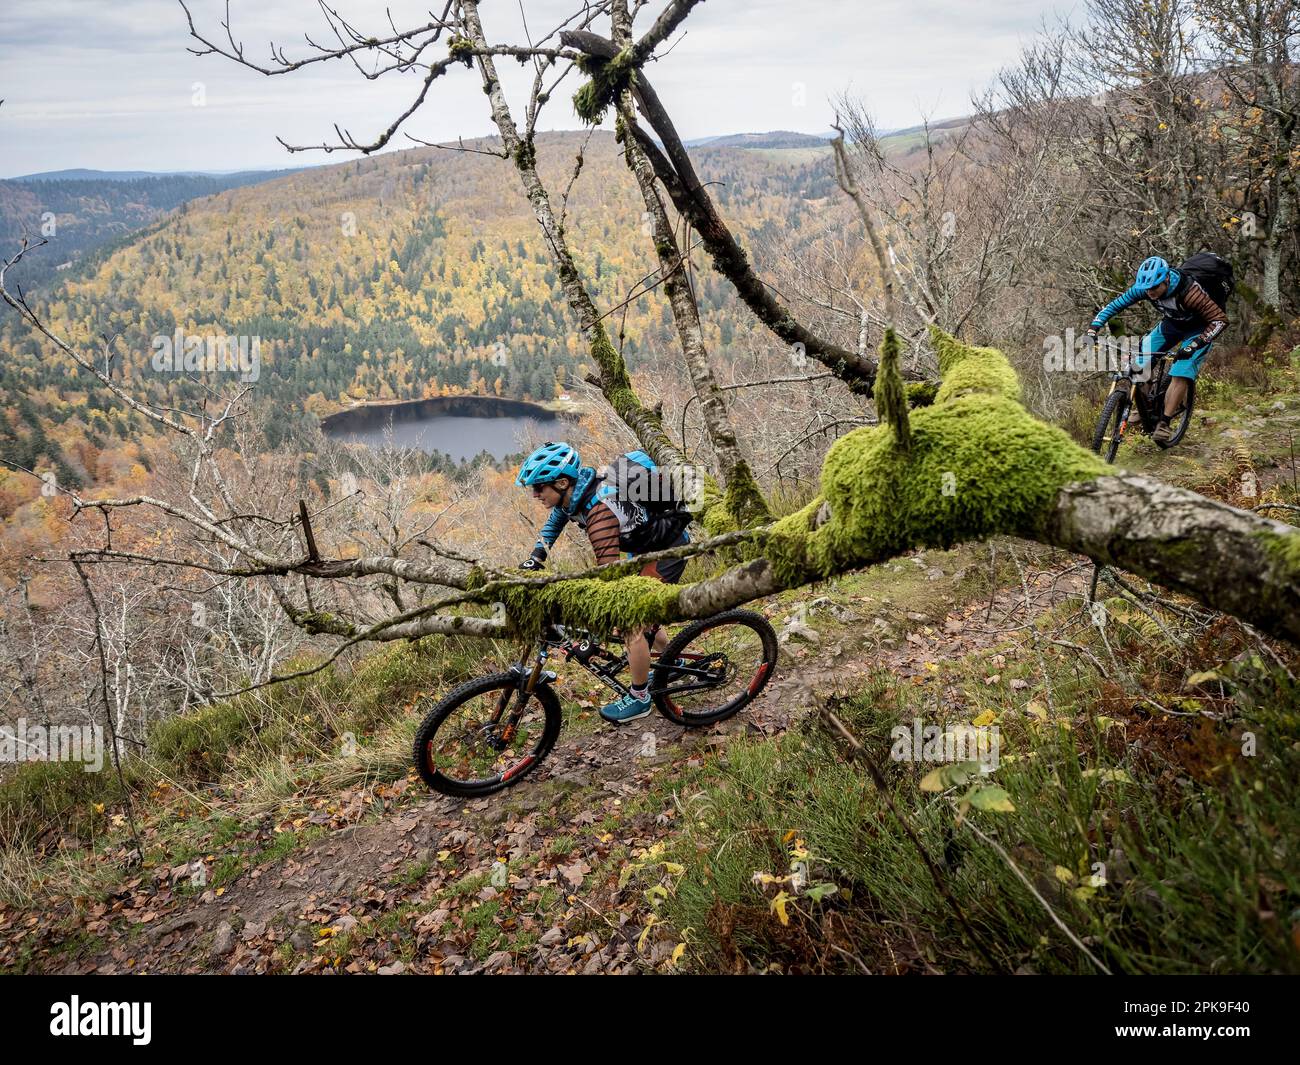 Mountain biker on a forest road near the Route des Cretes in the Rainkopf. Stock Photo